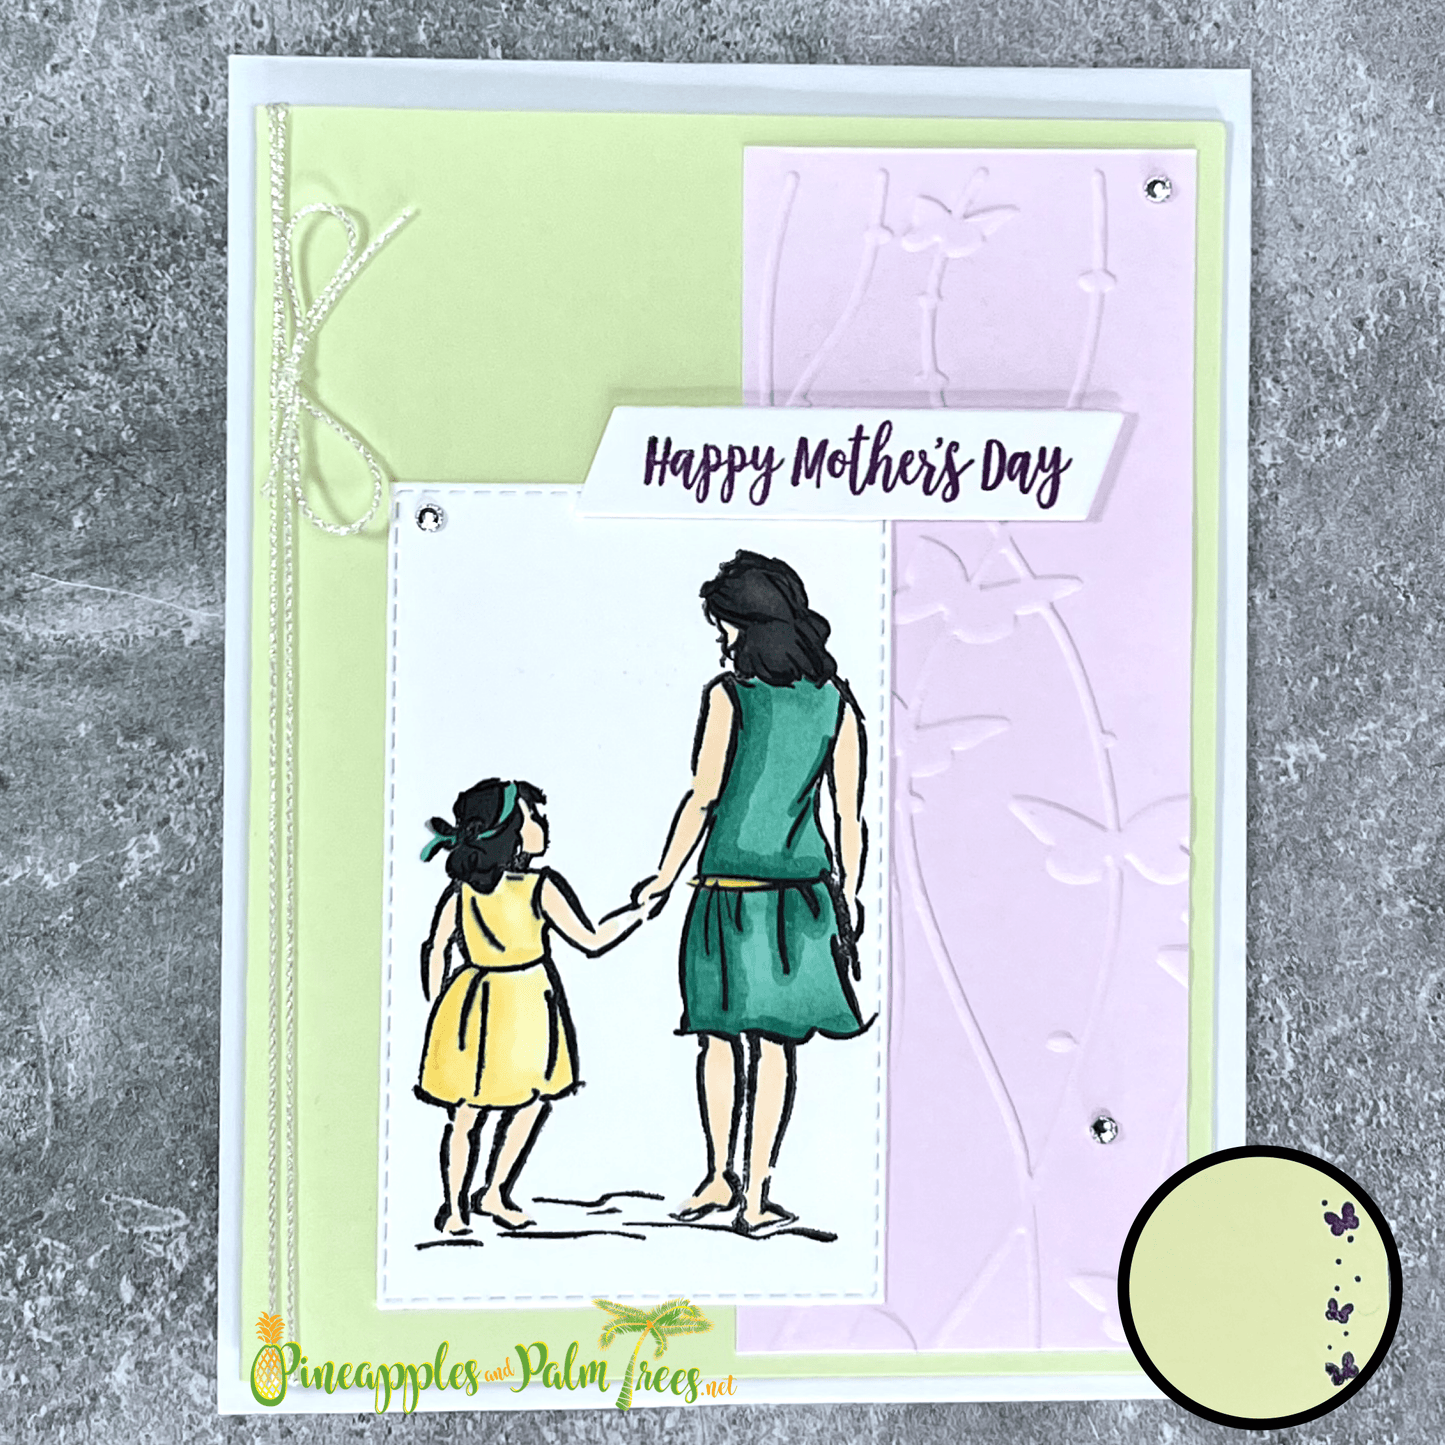 Greeting Card: Happy Mother's Day - green & lavender